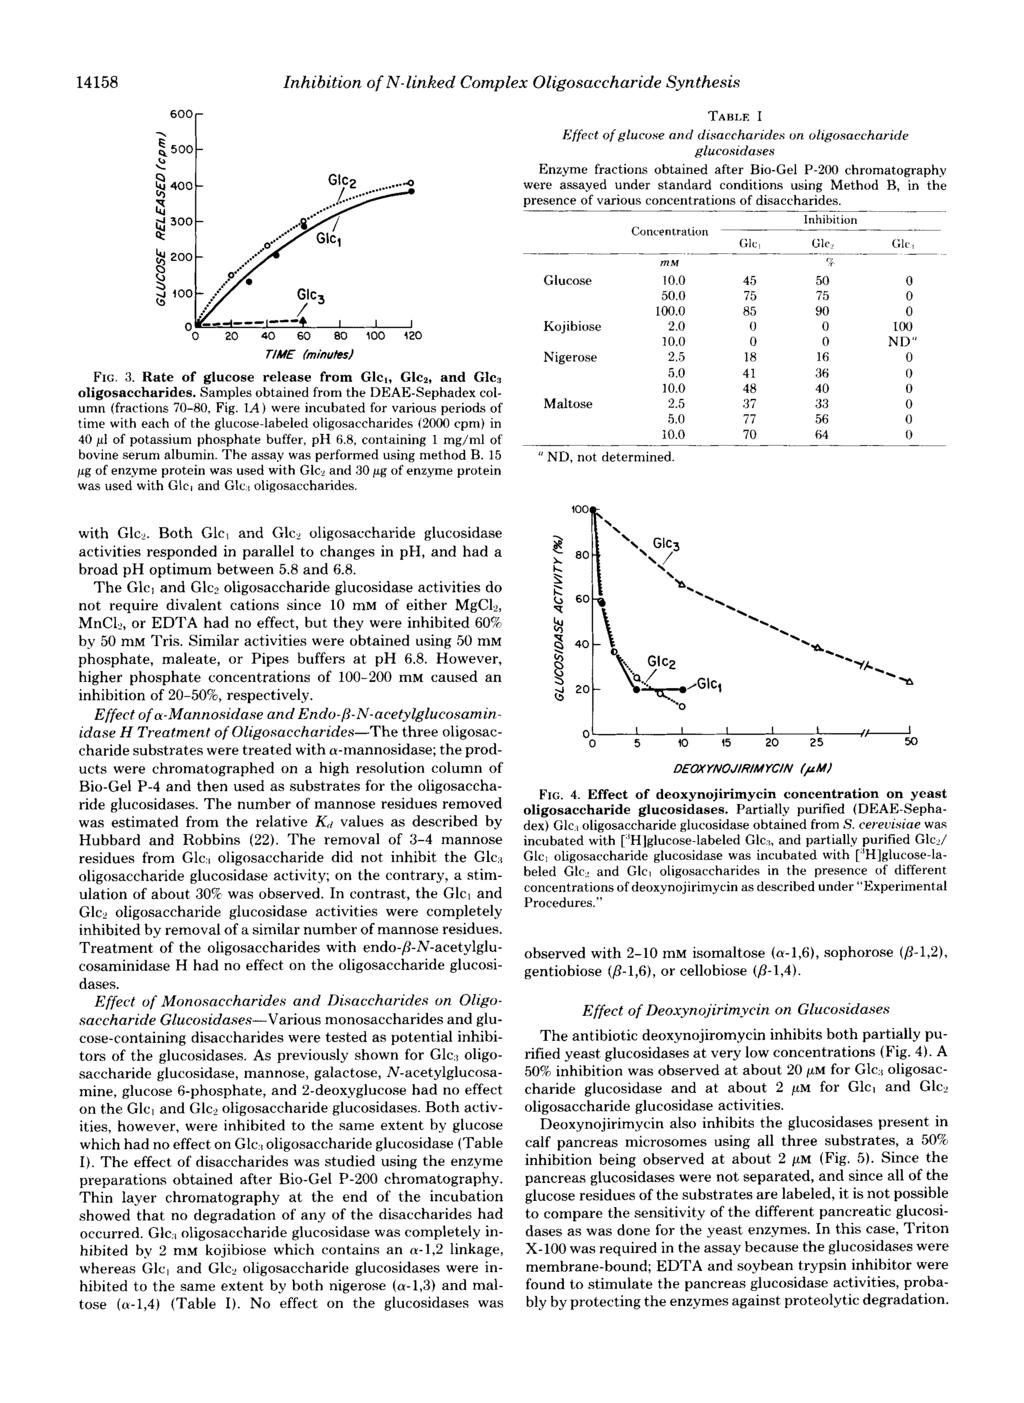 14158 Inhibition of N-linked Complex Oligosaccharide Synthesis o 2 4 6 eo too 12 TfME lminuted FIG. 3. Rate of glucose release from Glc,, Glcn, and GlcB oligosaccharides.